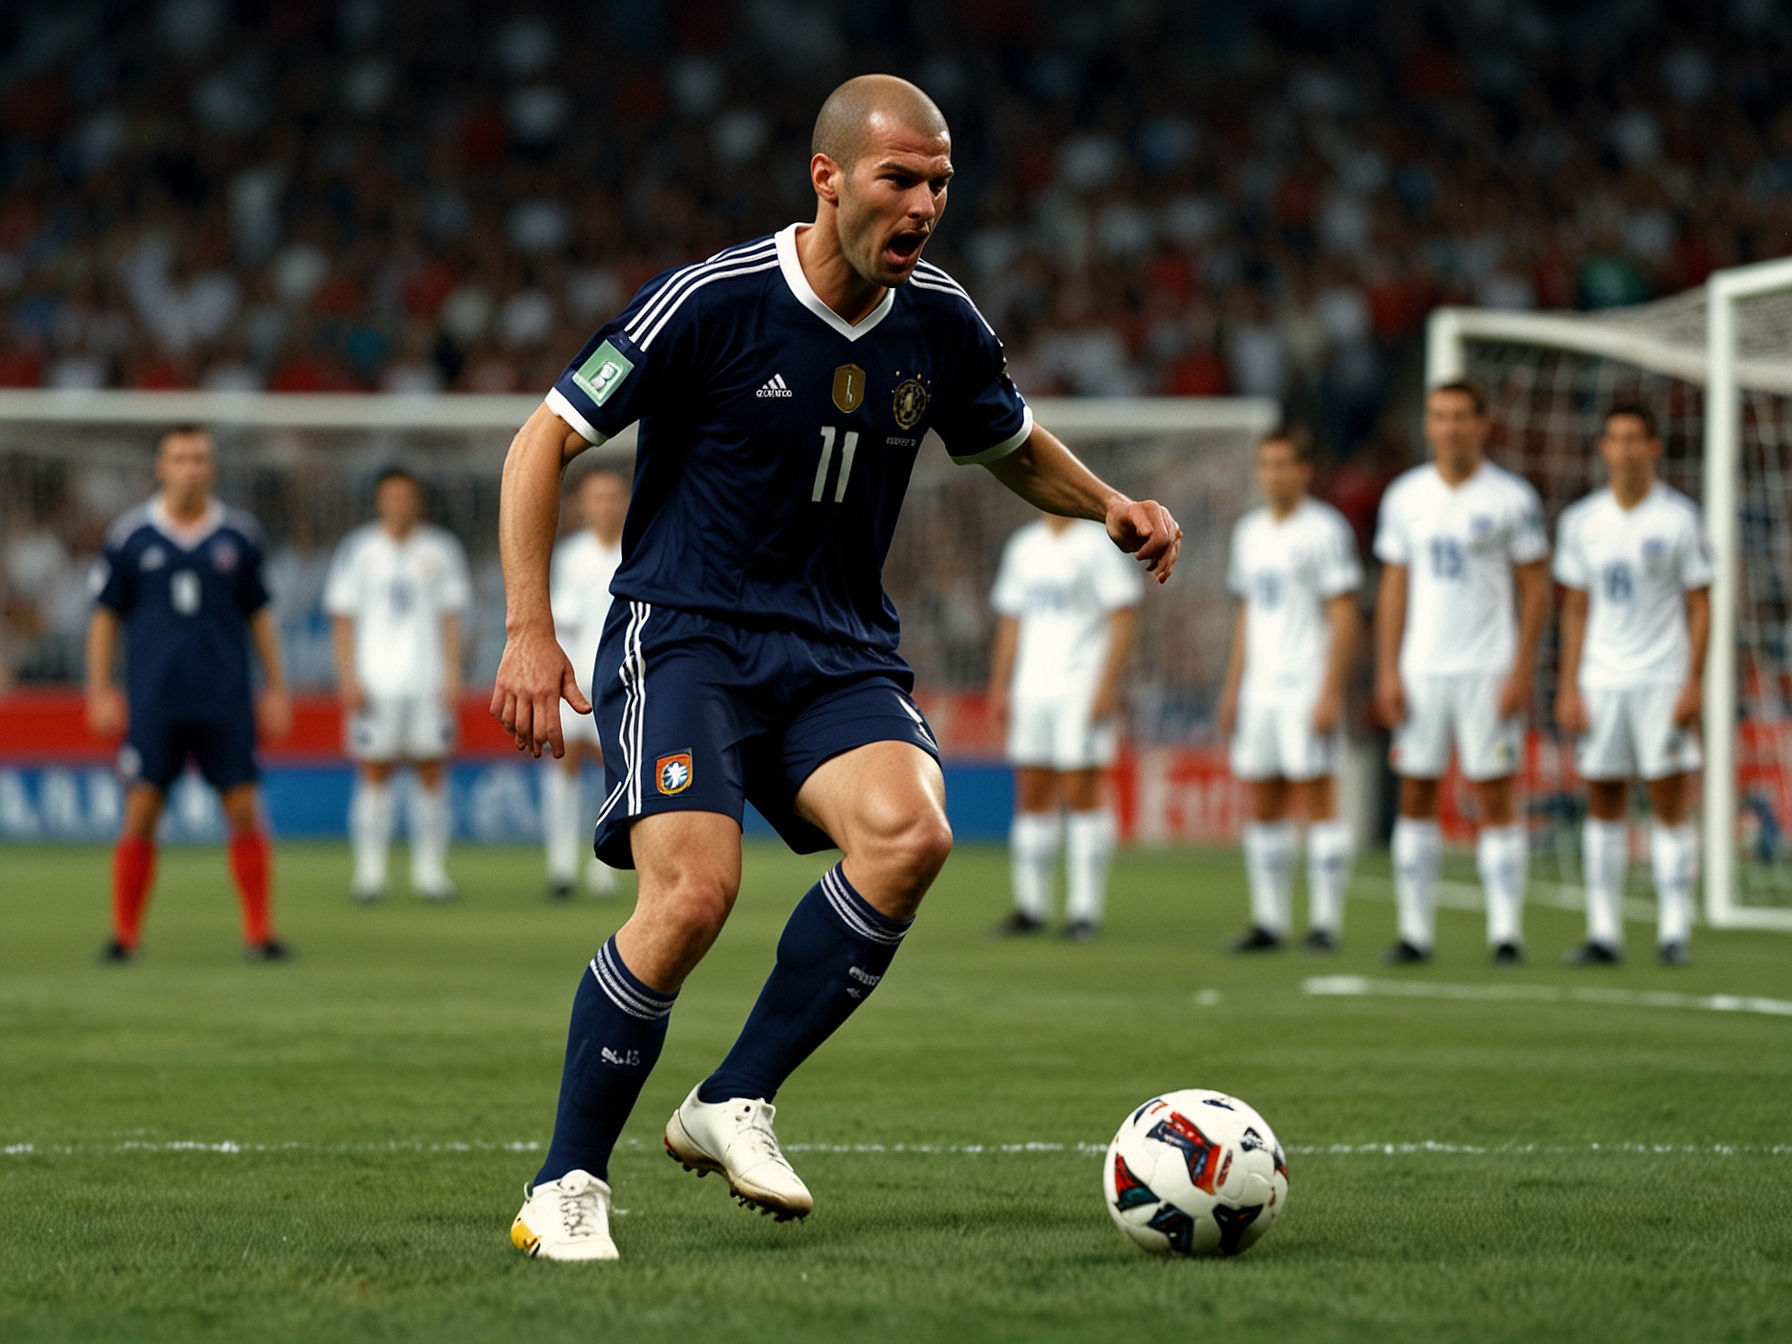 Zinedine Zidane takes a precise free kick during the Euro 2004 match against England, showcasing his technical prowess and calmness under pressure, moments before equalizing the game.